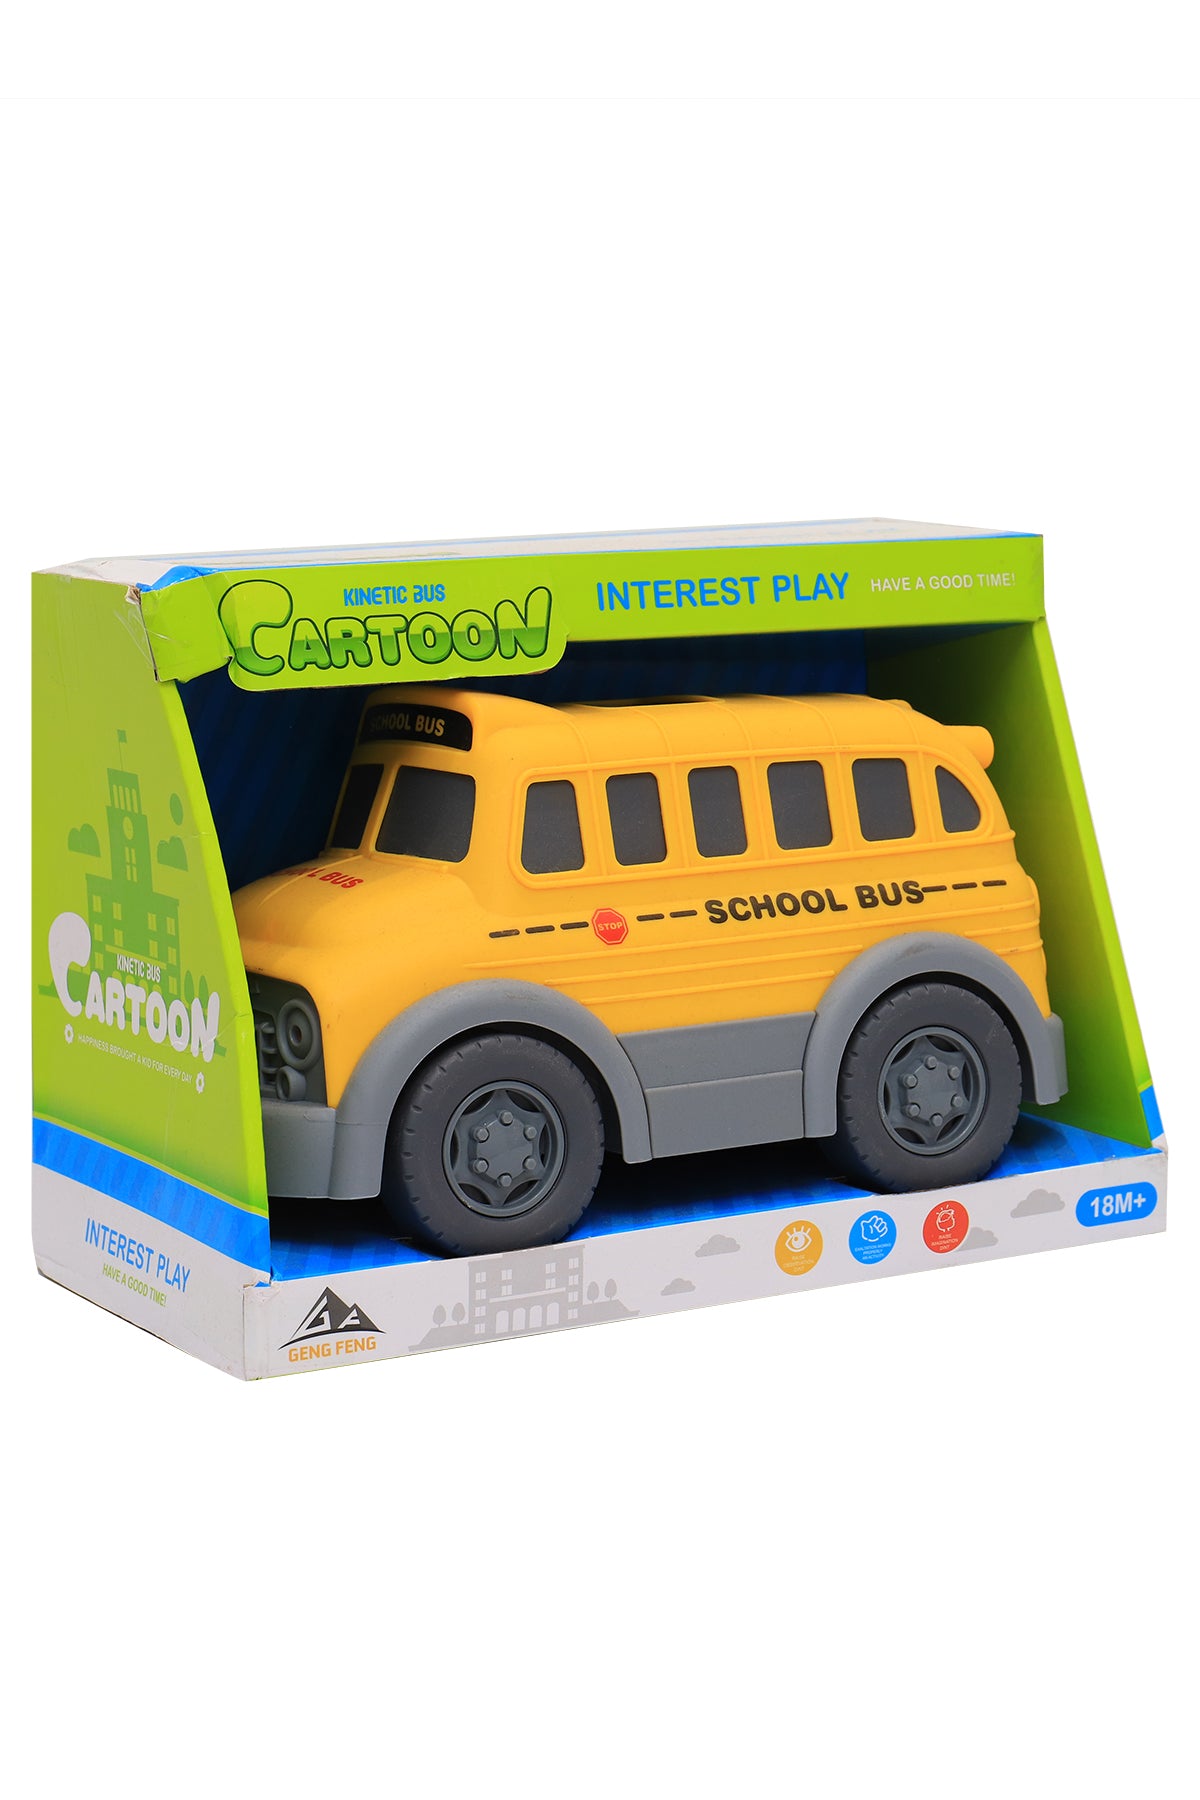 School Bus Vehicle Toy For Kids